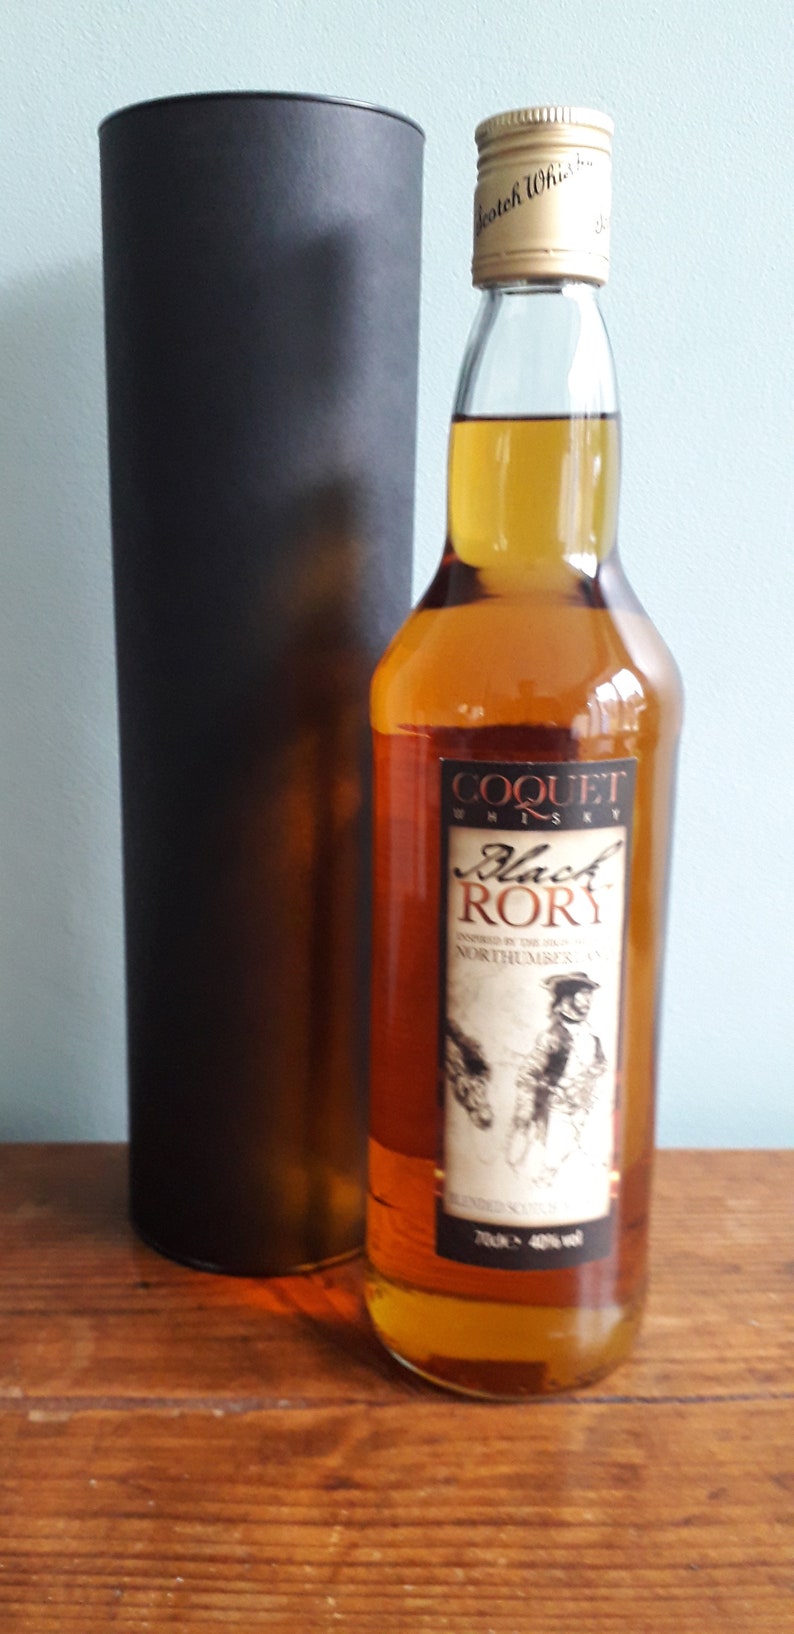 Black Rory Whisky 70cl image 1